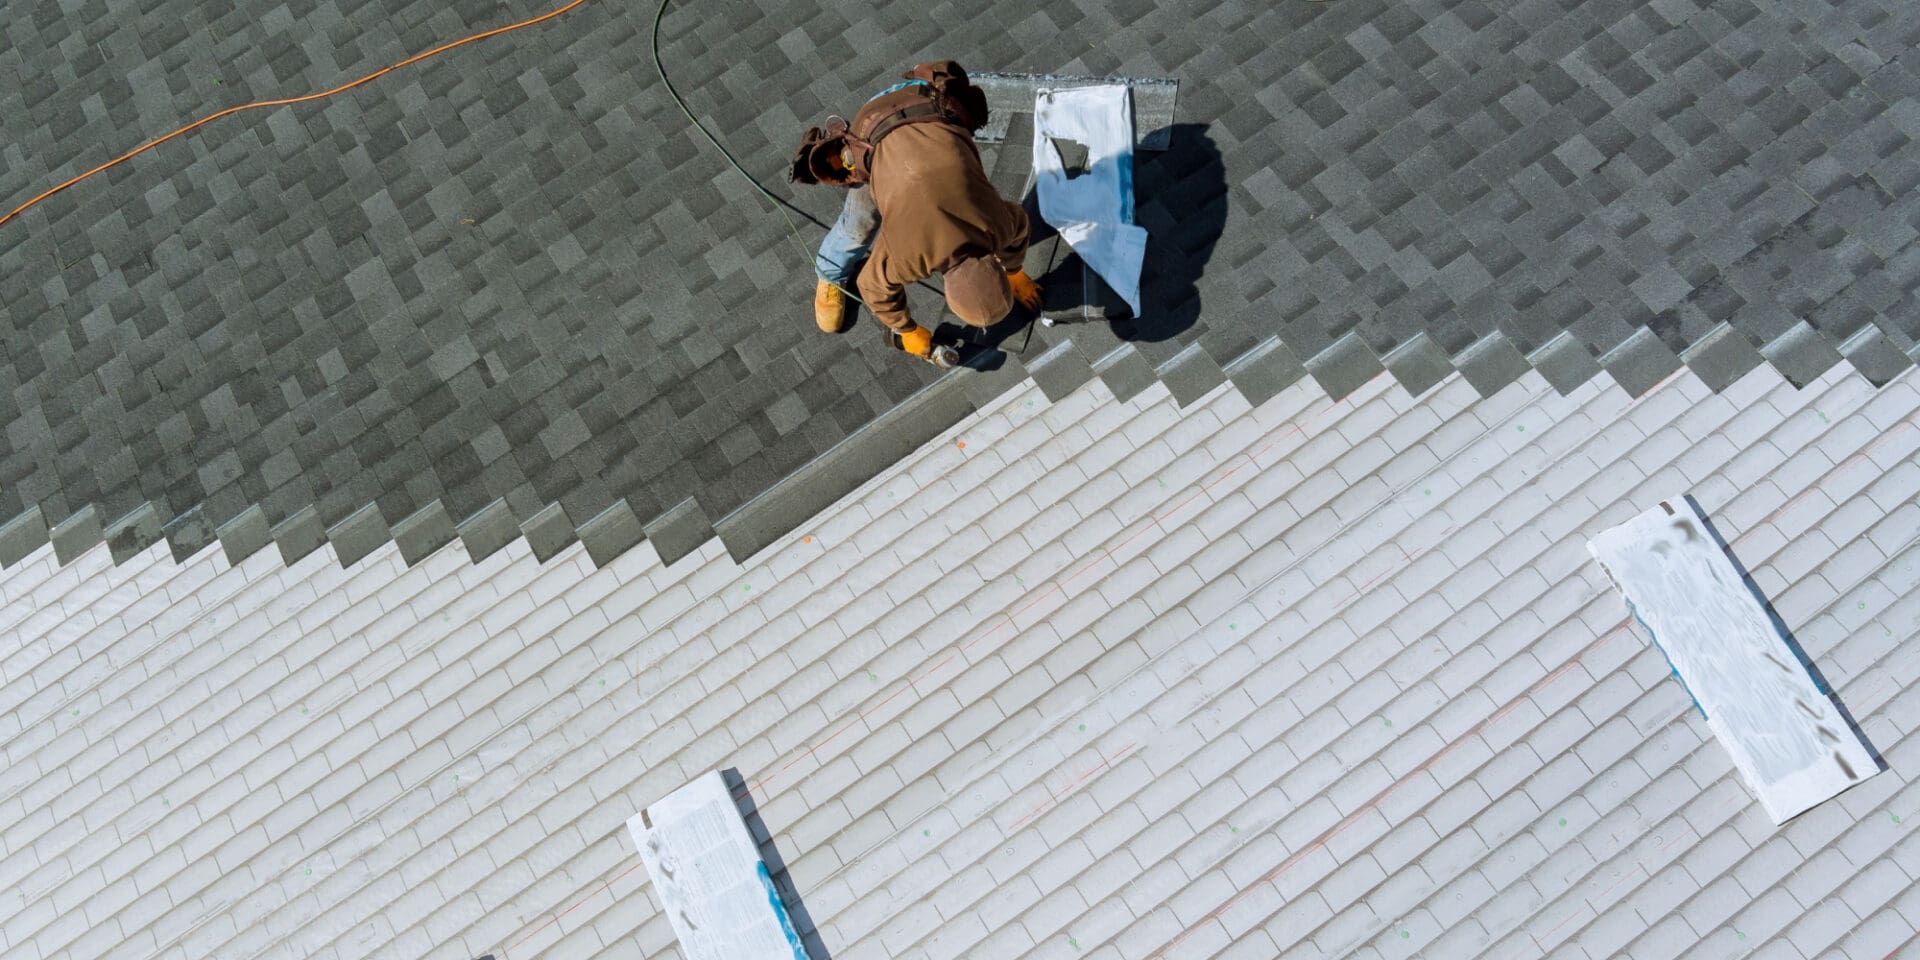 Get the Best Roof Shingle Colors from the Best Shingle Installers